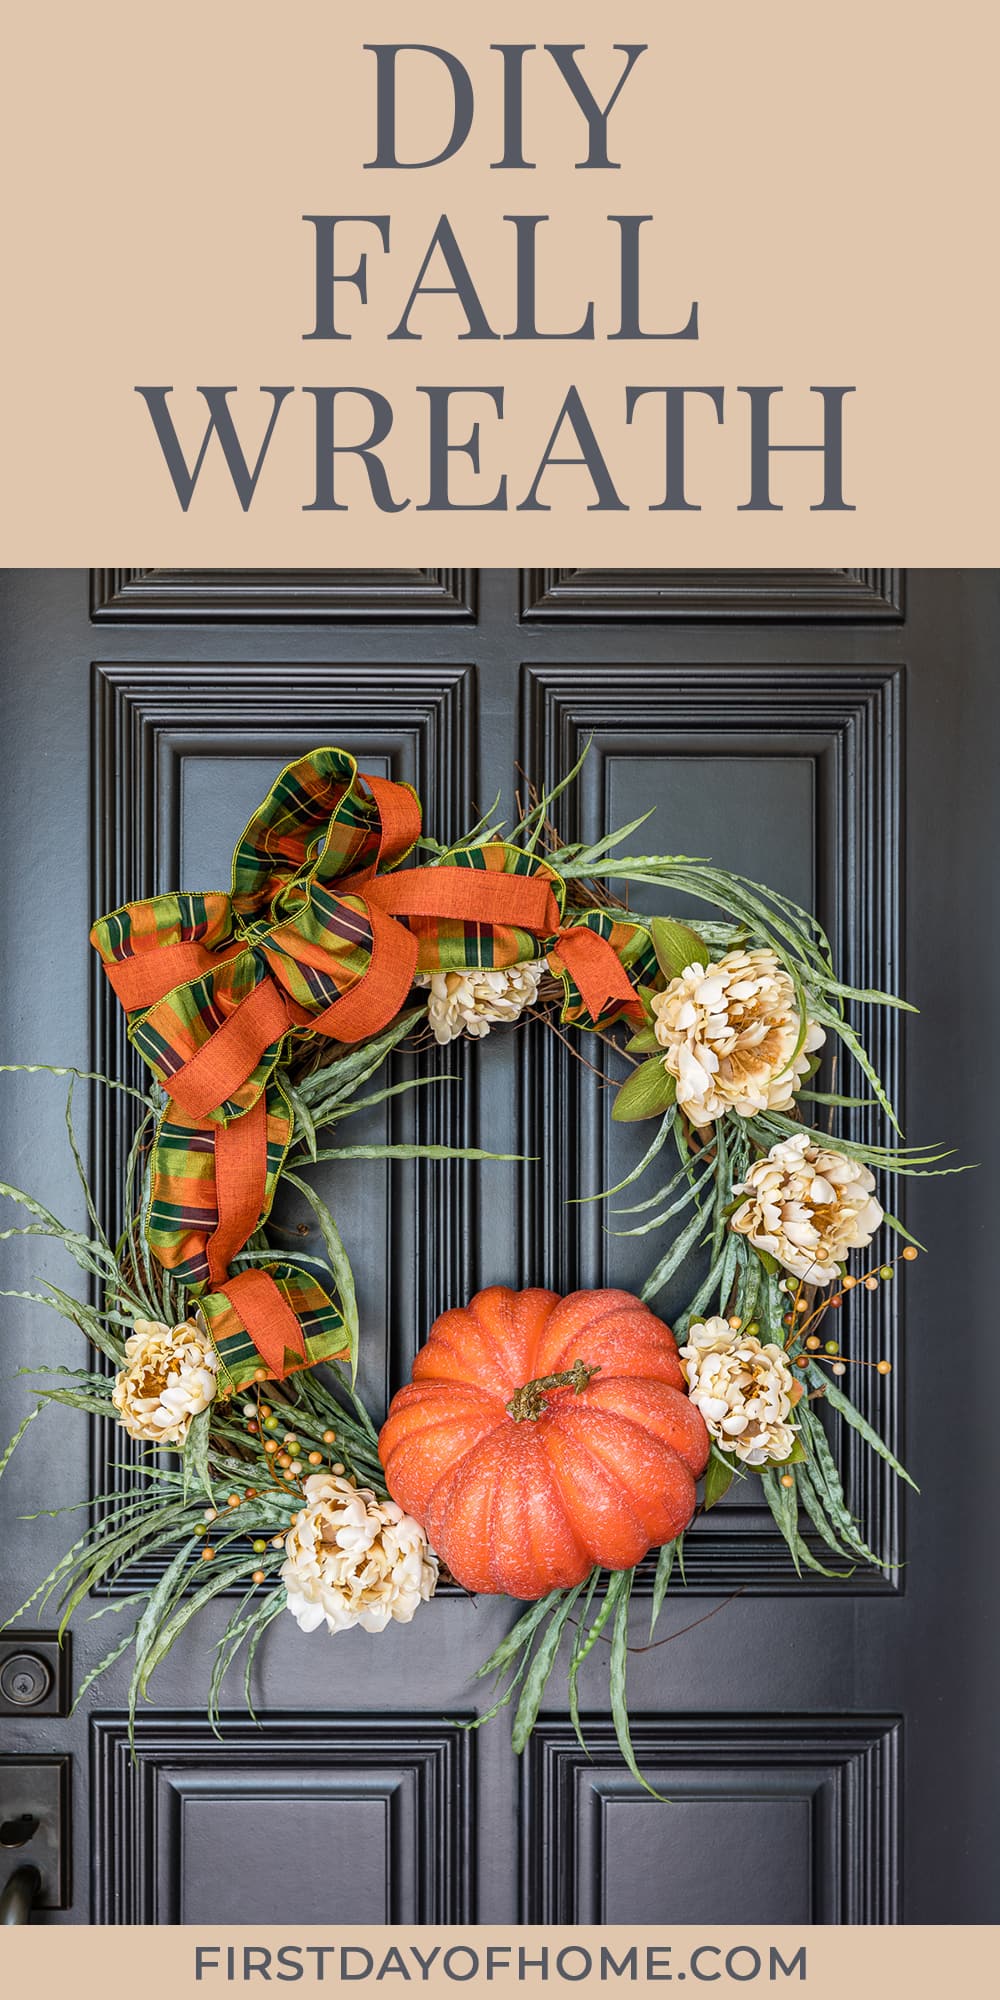 Fall wreath decorated with a large pumpkin, peonies, greenery, and ribbon. Text overlay reads "DIY Fall Wreath"